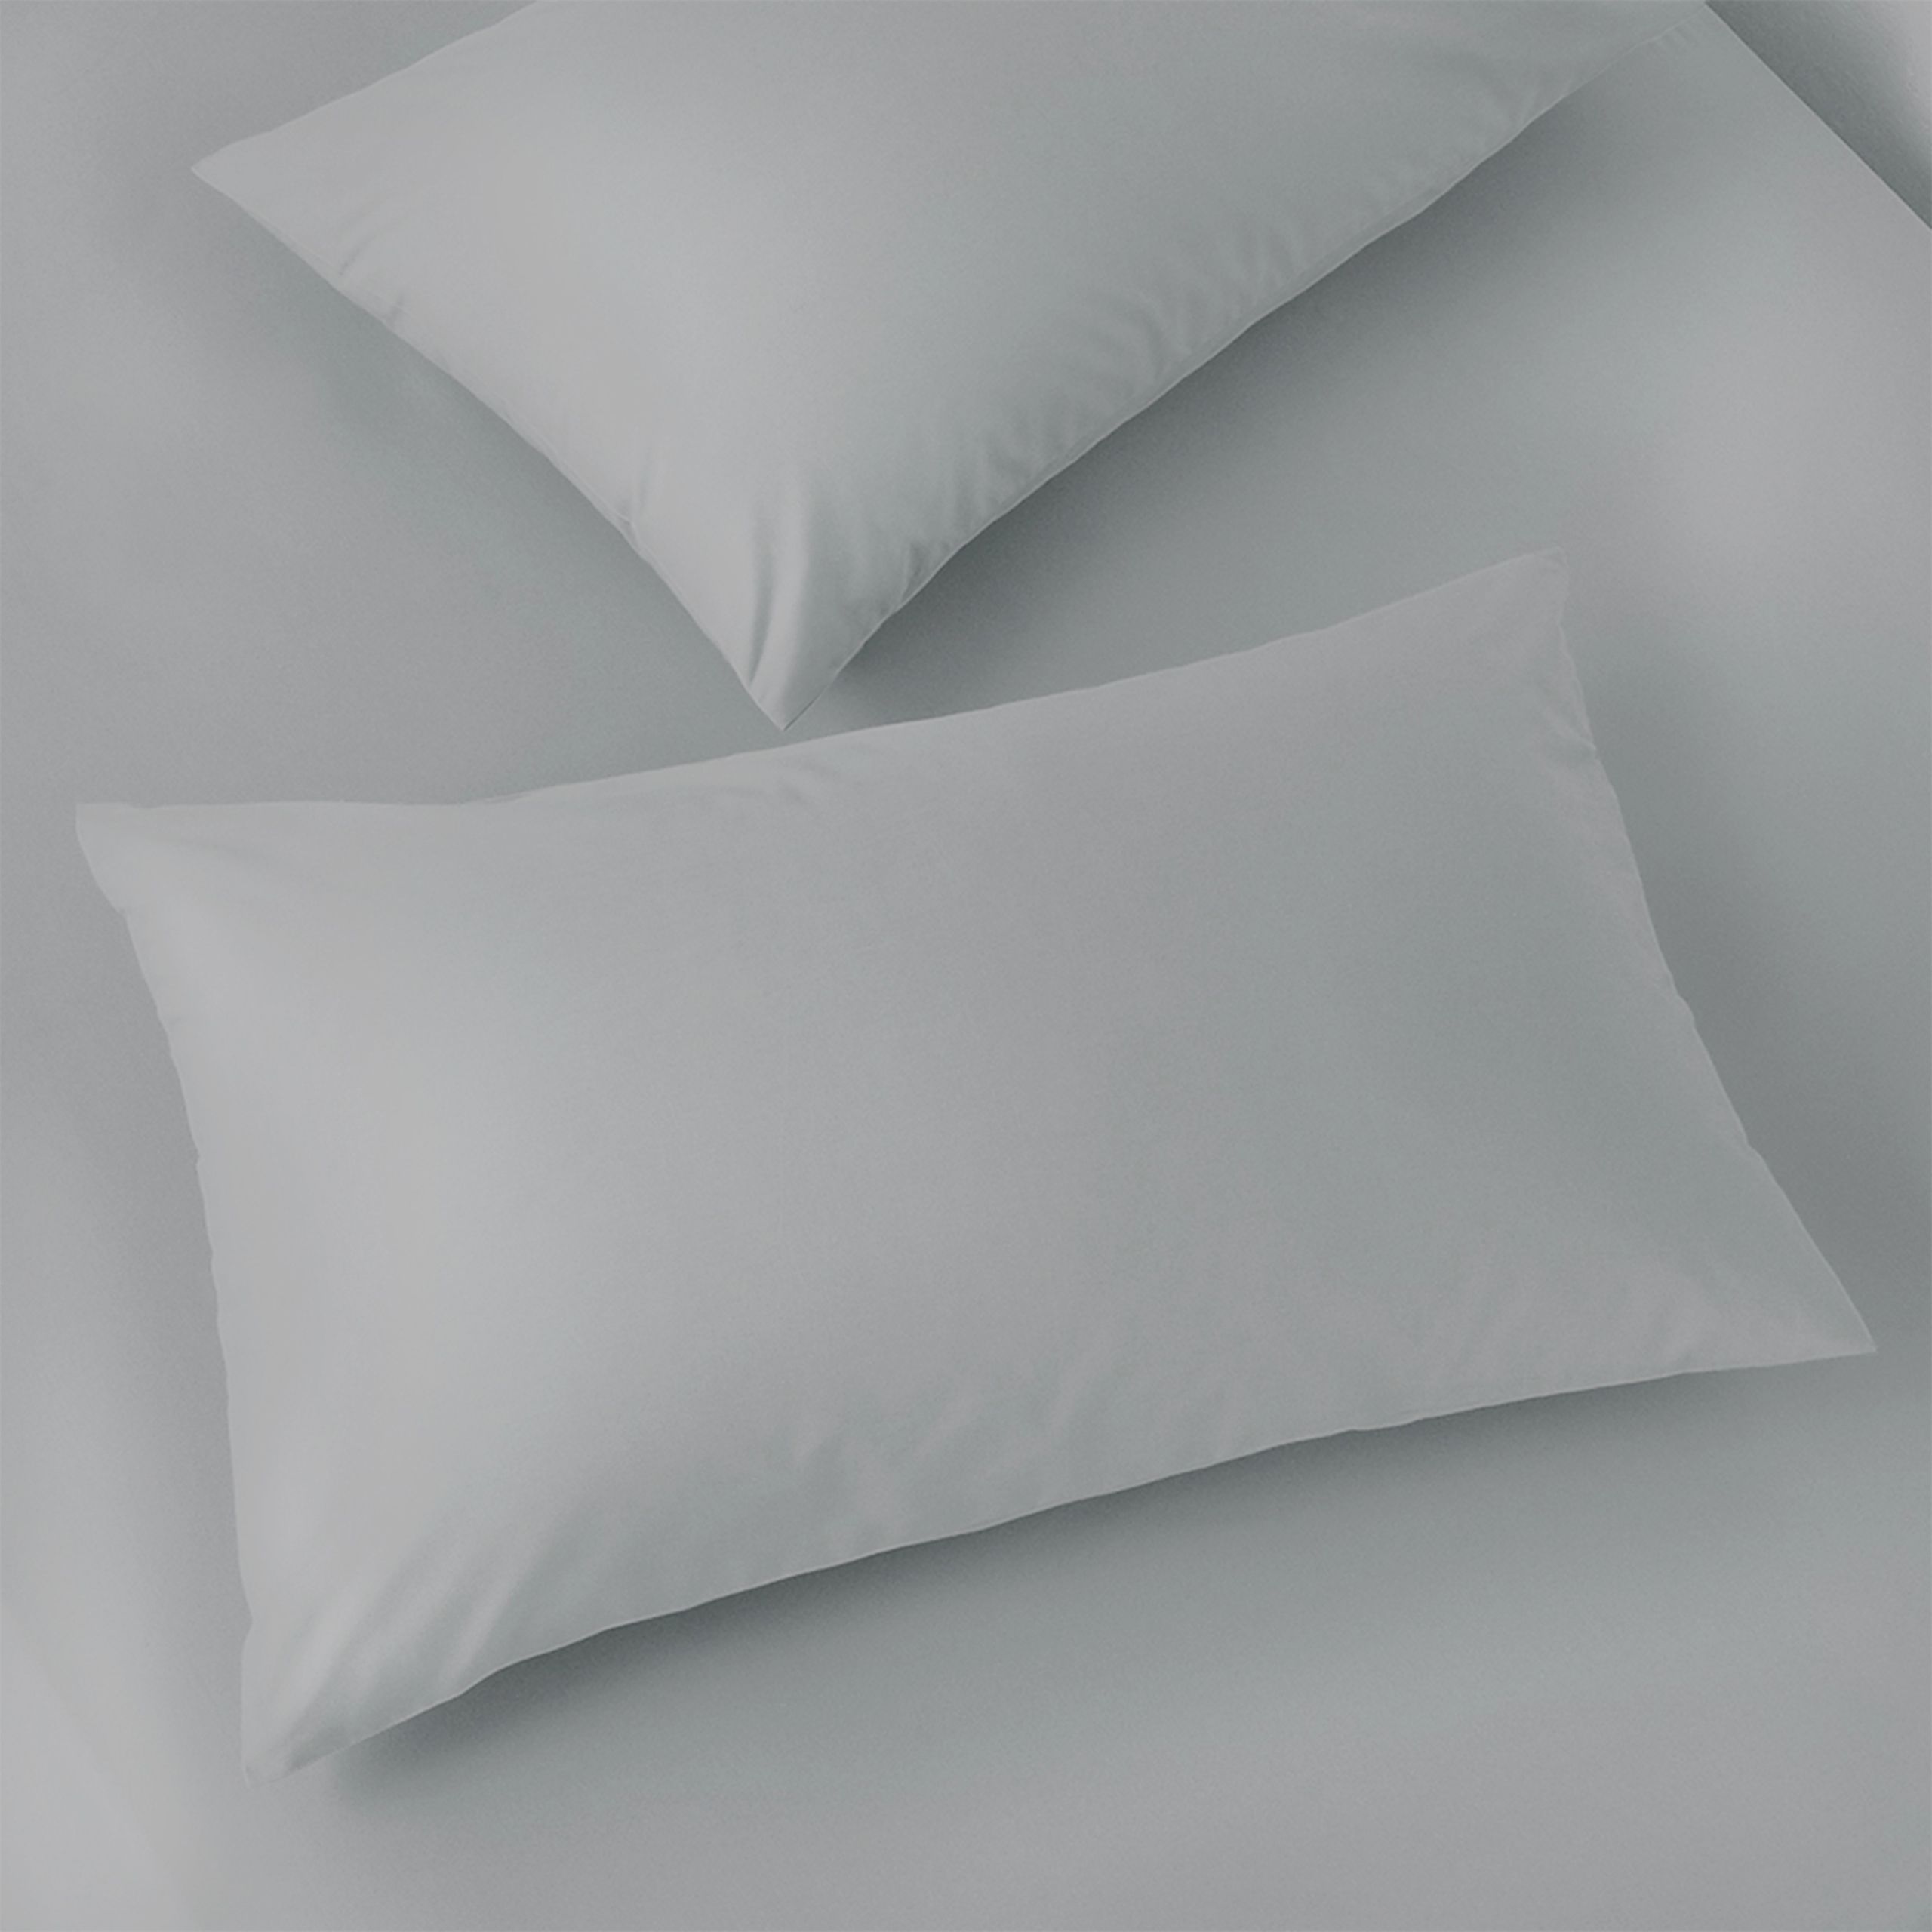 Featuring a luxurious 200-thread count bamboo blend. Complete with an envelope closure. Made of a Cotton/Bamboo blend with a 200 thread count, making this pillowcase set ultra-soft to the touch. Includes two housewife pillowcases measuring 50 x 75cm (20